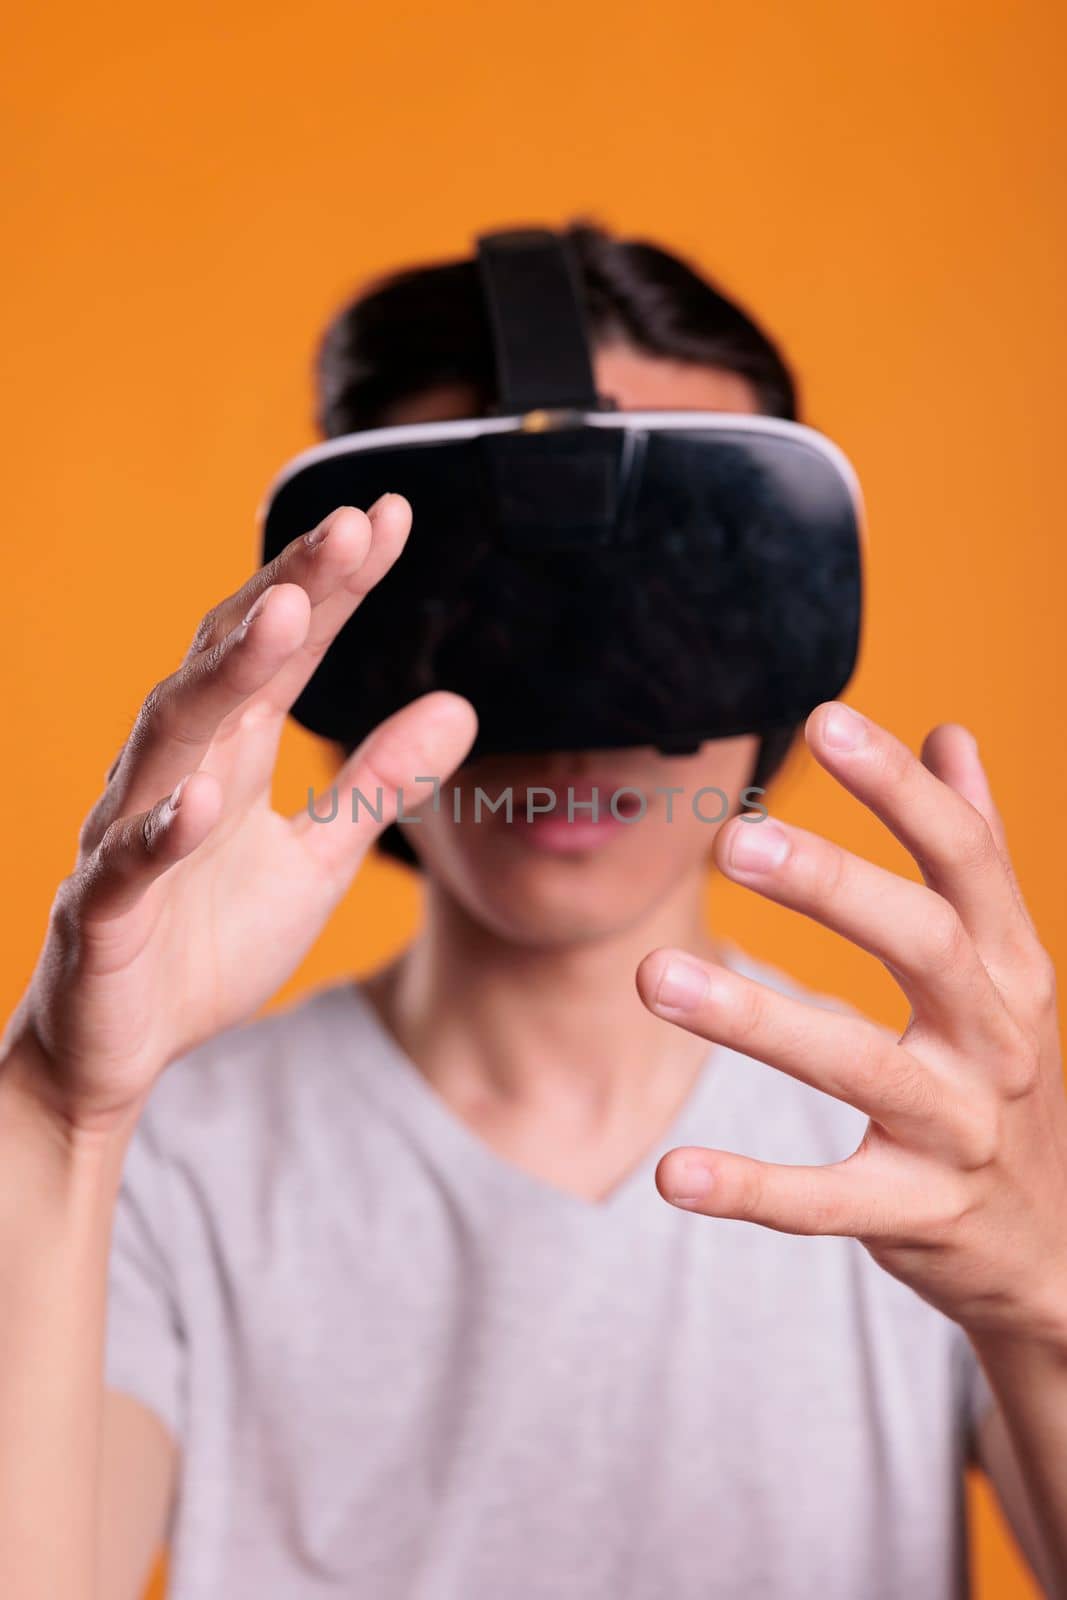 Gamer wearing vr headset playing virtual reality games, exploring metaverse close view, focus on hands. Person in ar goggles enjoying simulation experience, cyberspace entertainment